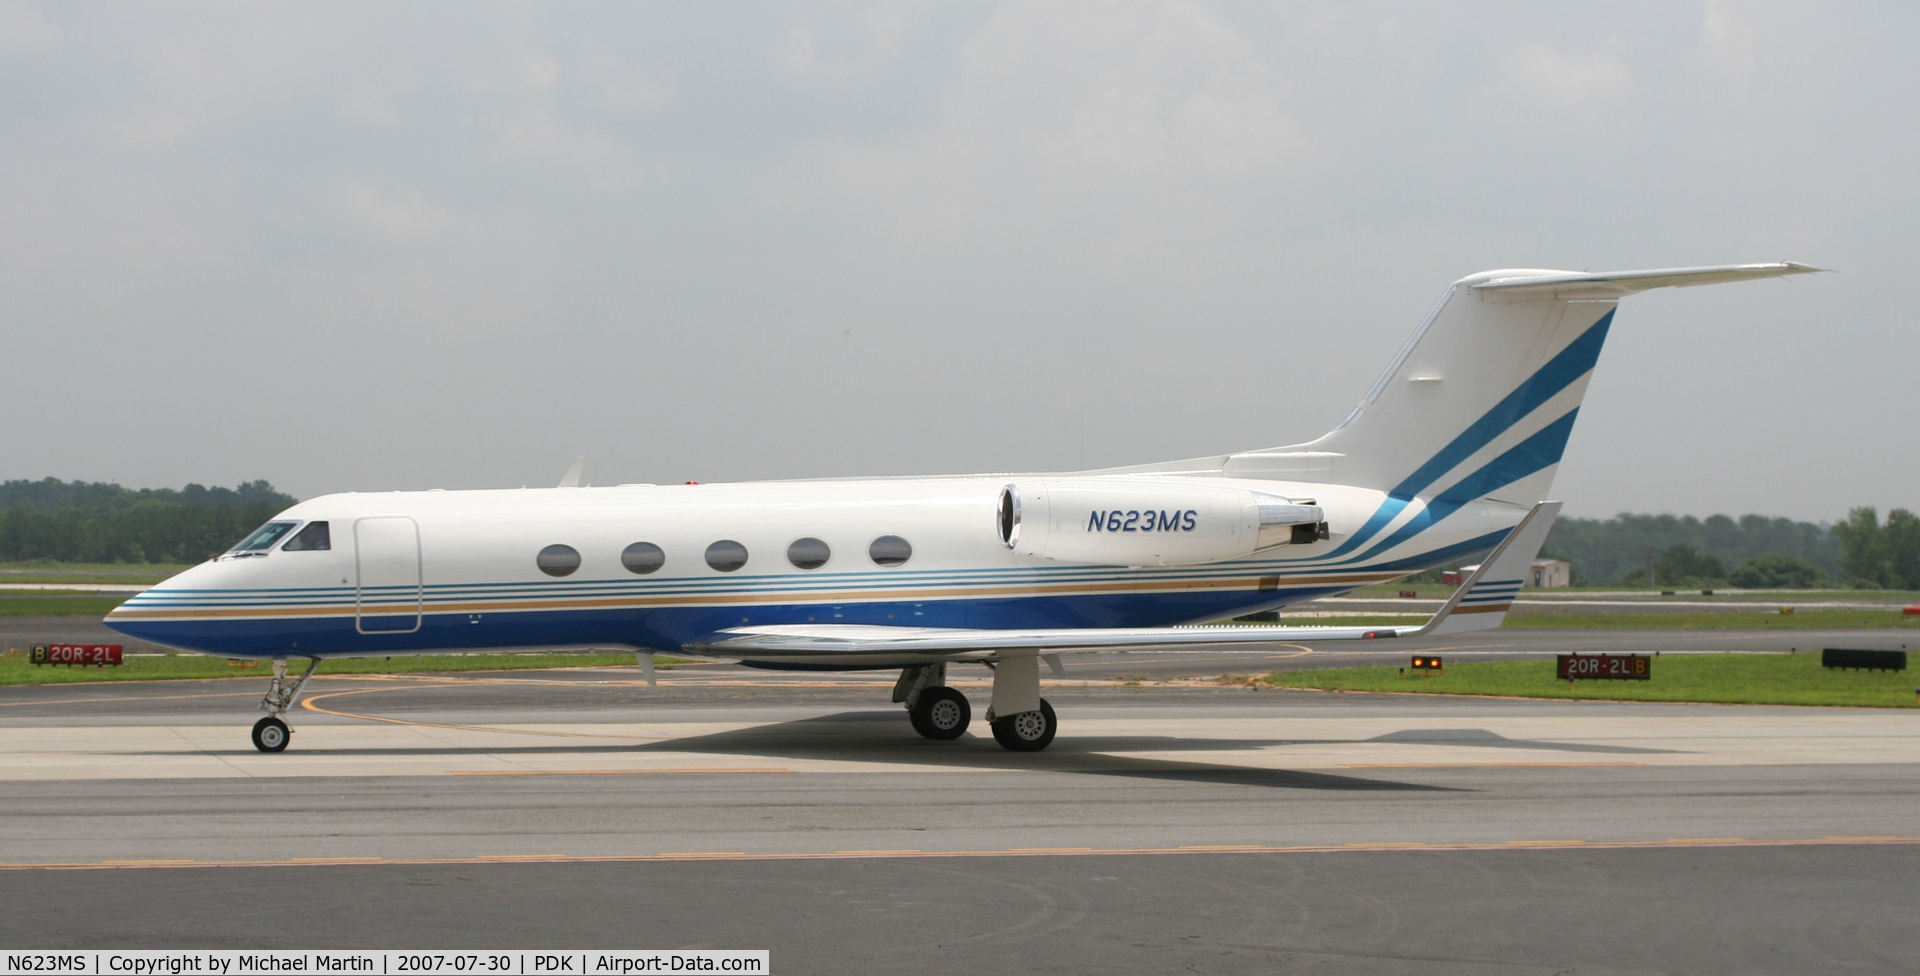 N623MS, 1982 Gulfstream American G-1159A Gulfstream III C/N 351, Taxing to Signature Flight Services